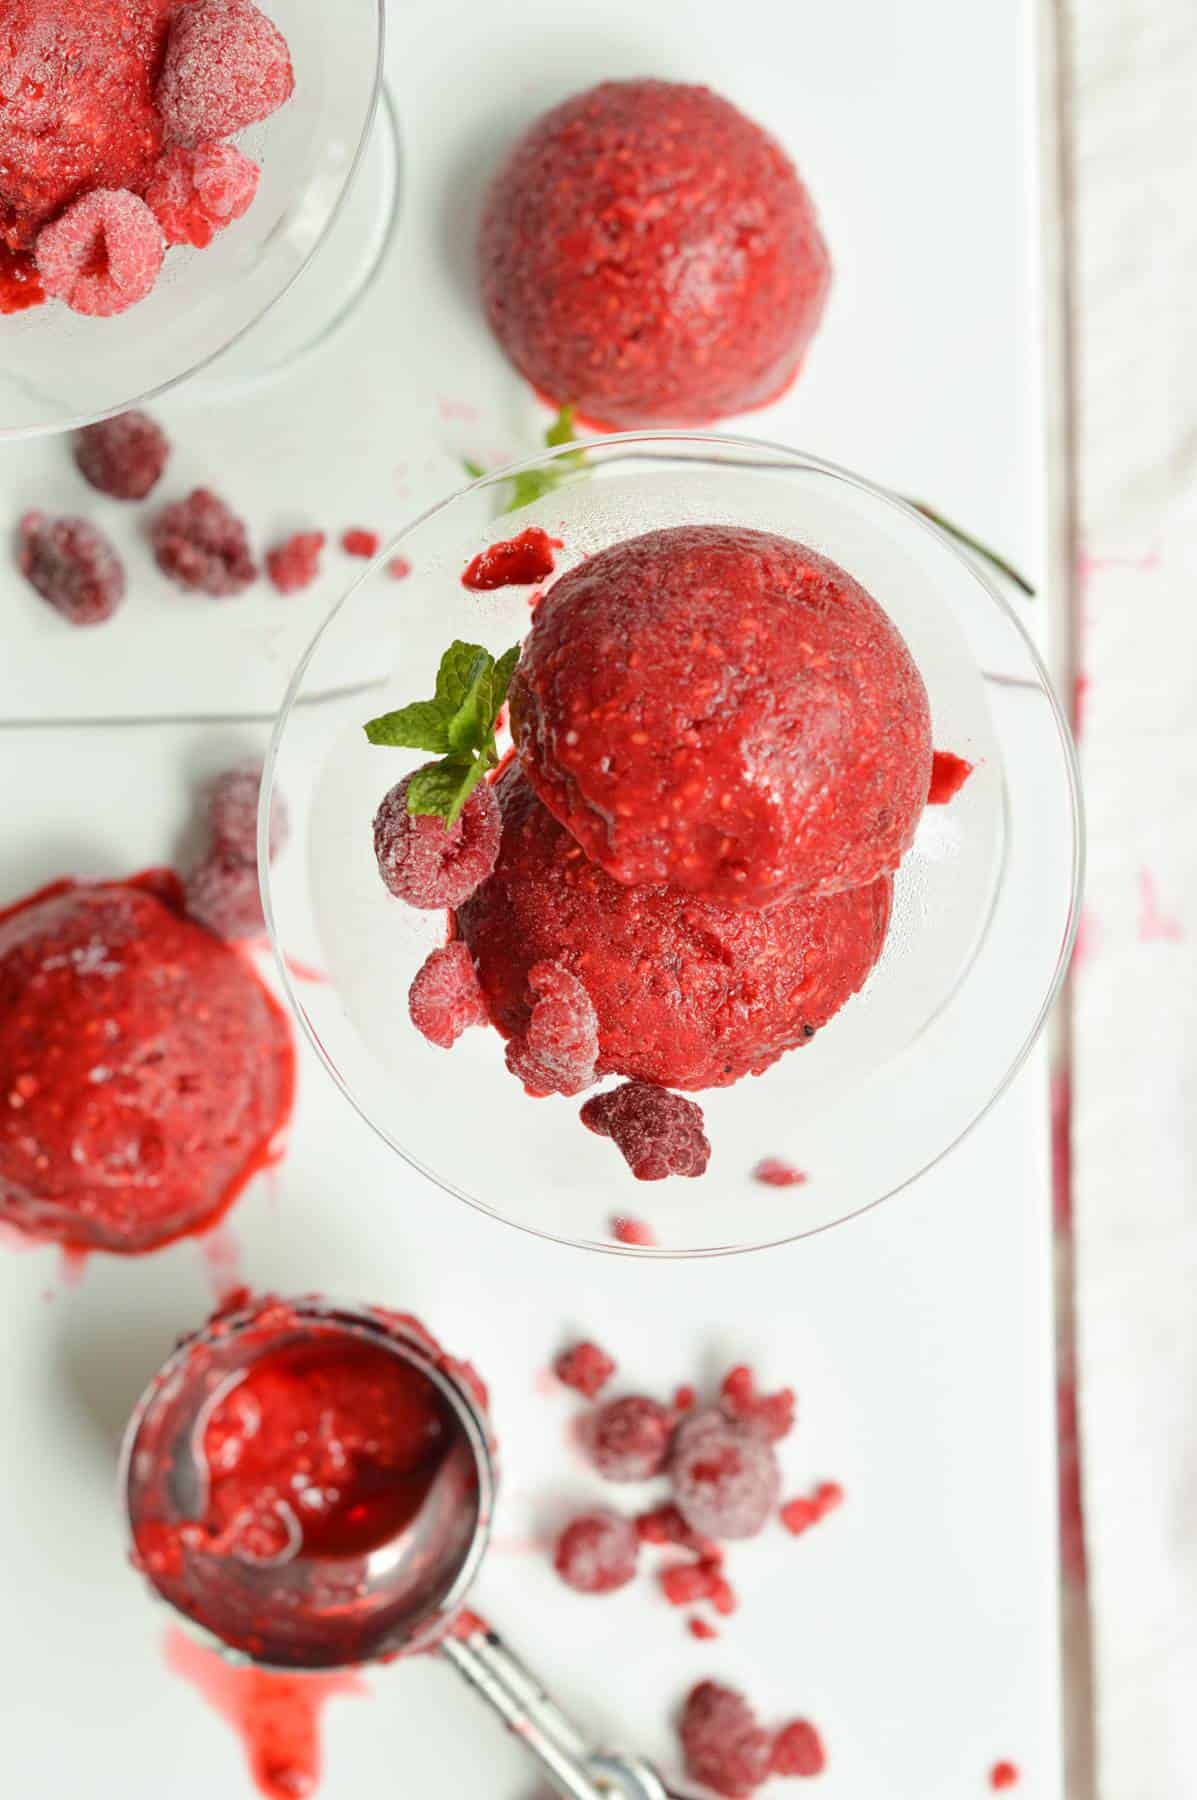 Sugar-Free Raspberry Sorbet Recipe (Only 4 Ingredients!) - The